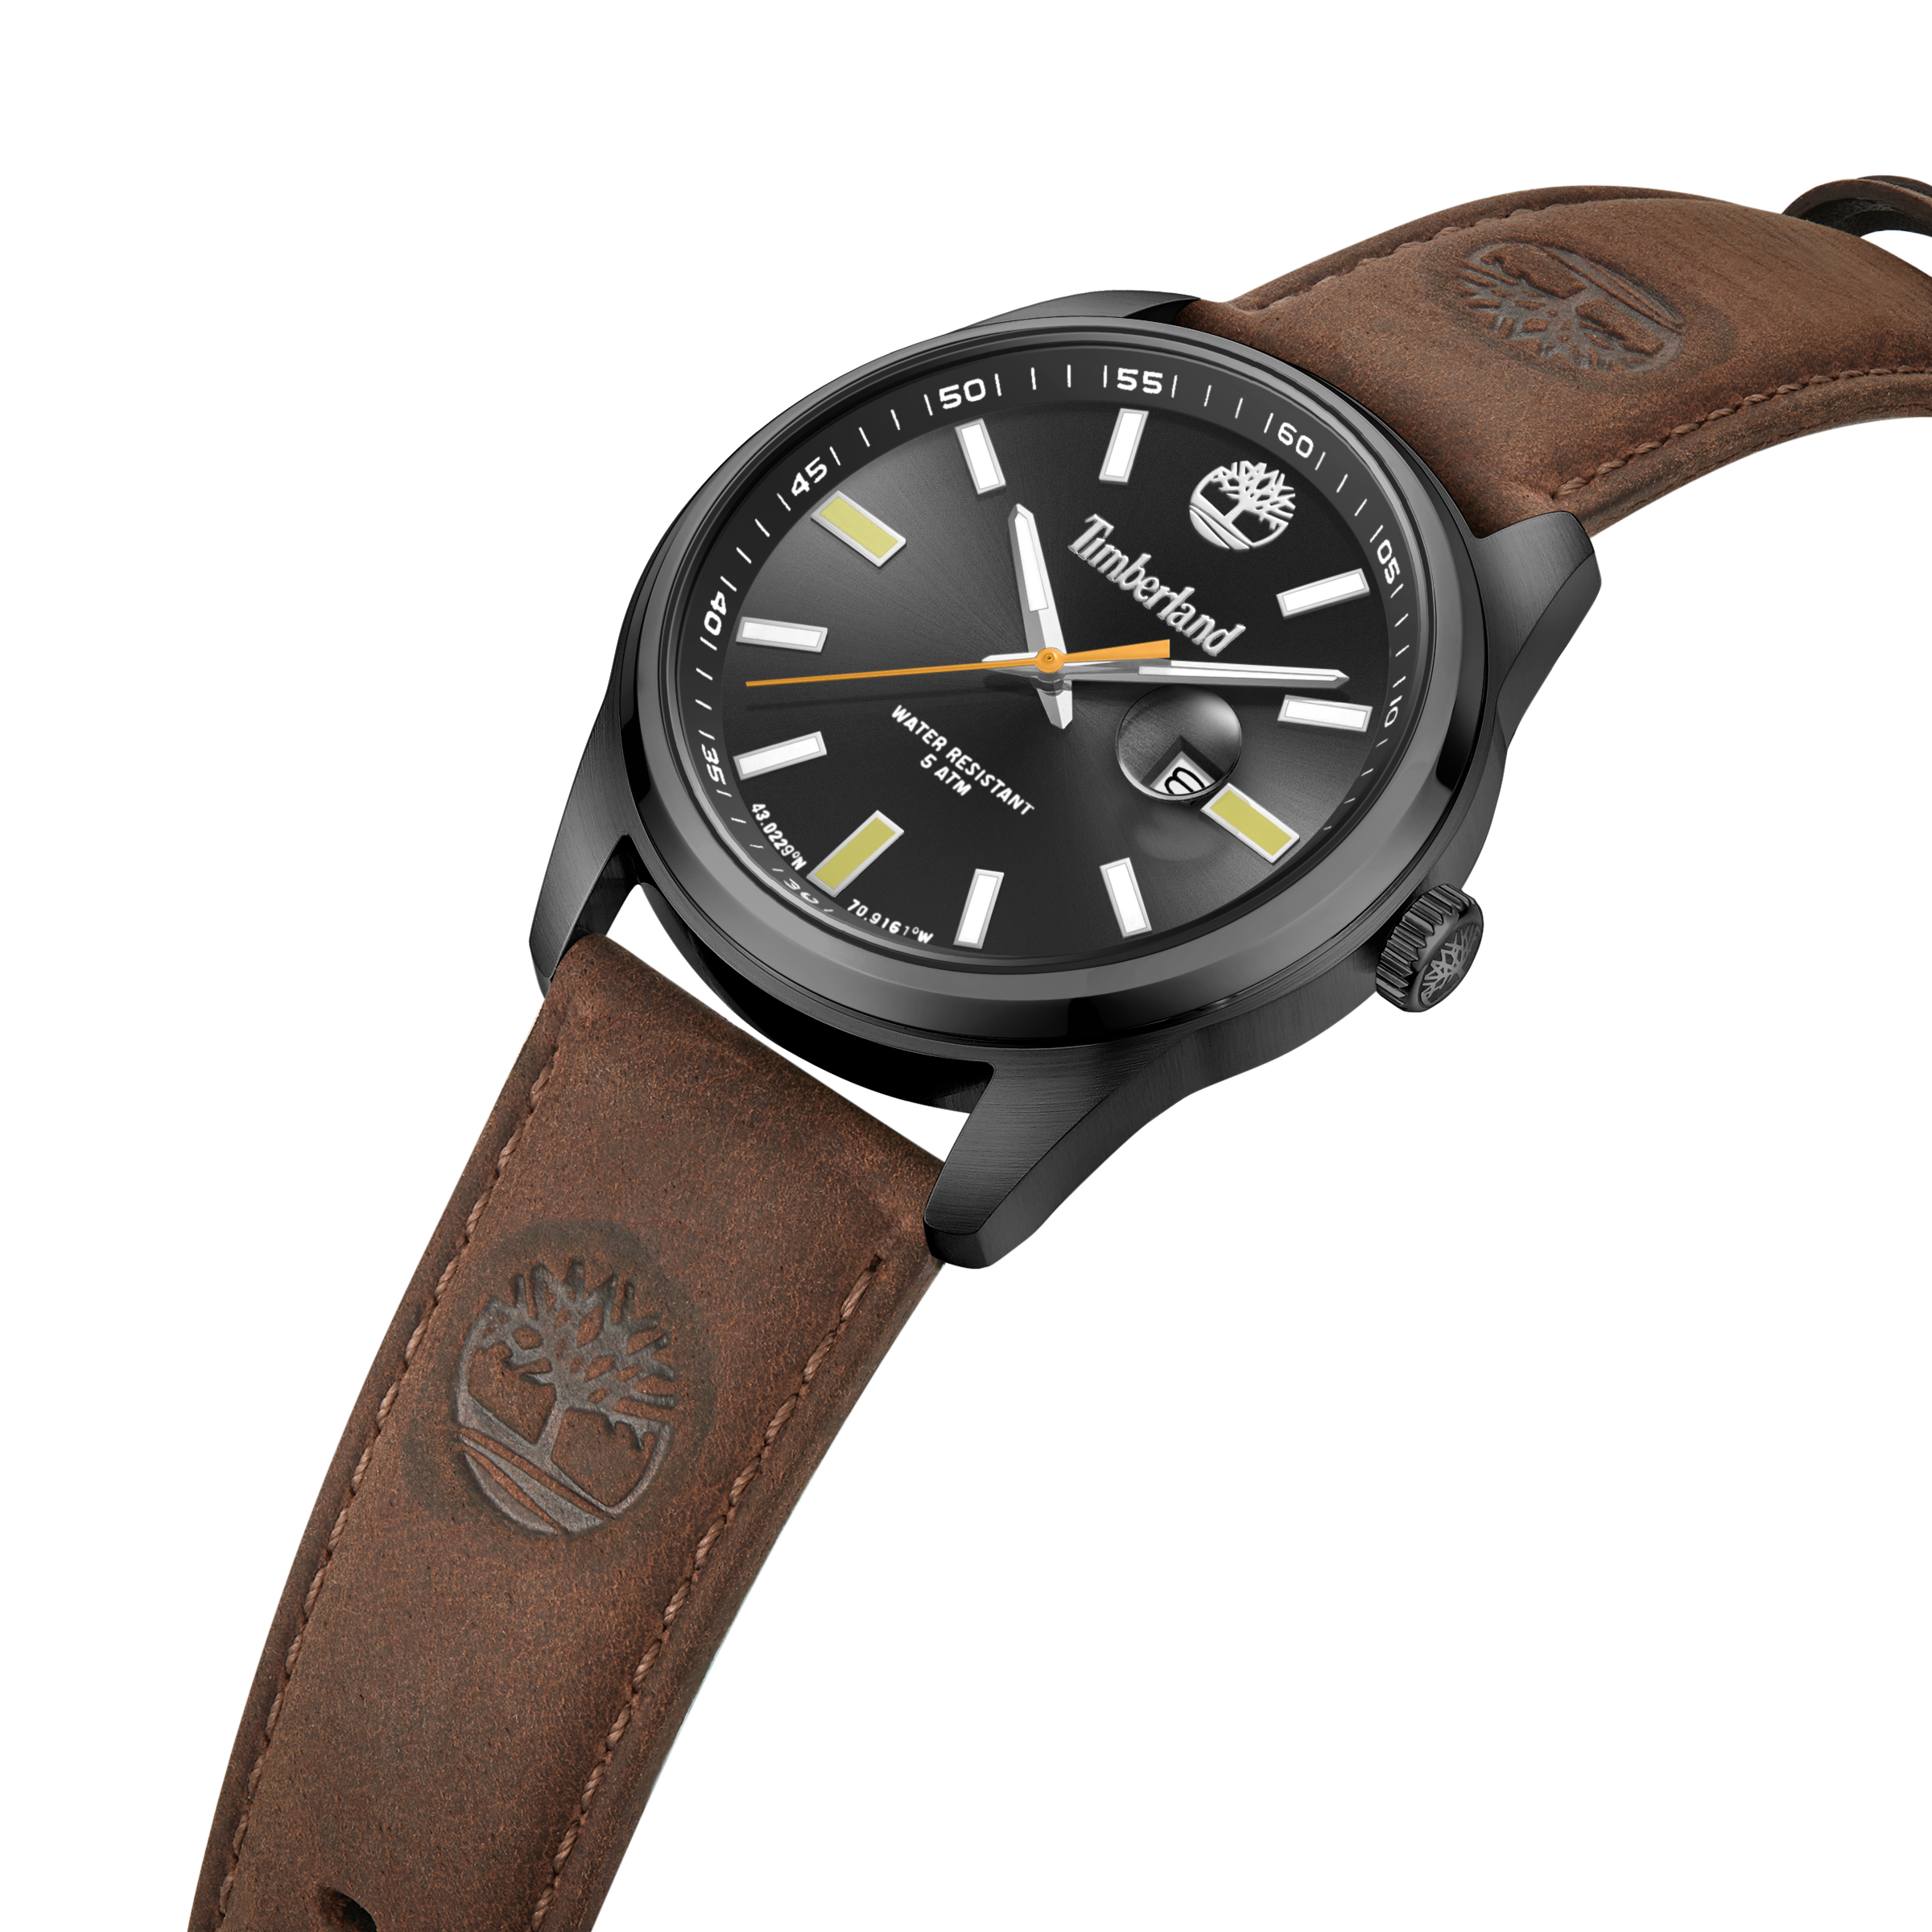 ORFORD TIMBERLAND, WATCHES – ATAMIAN